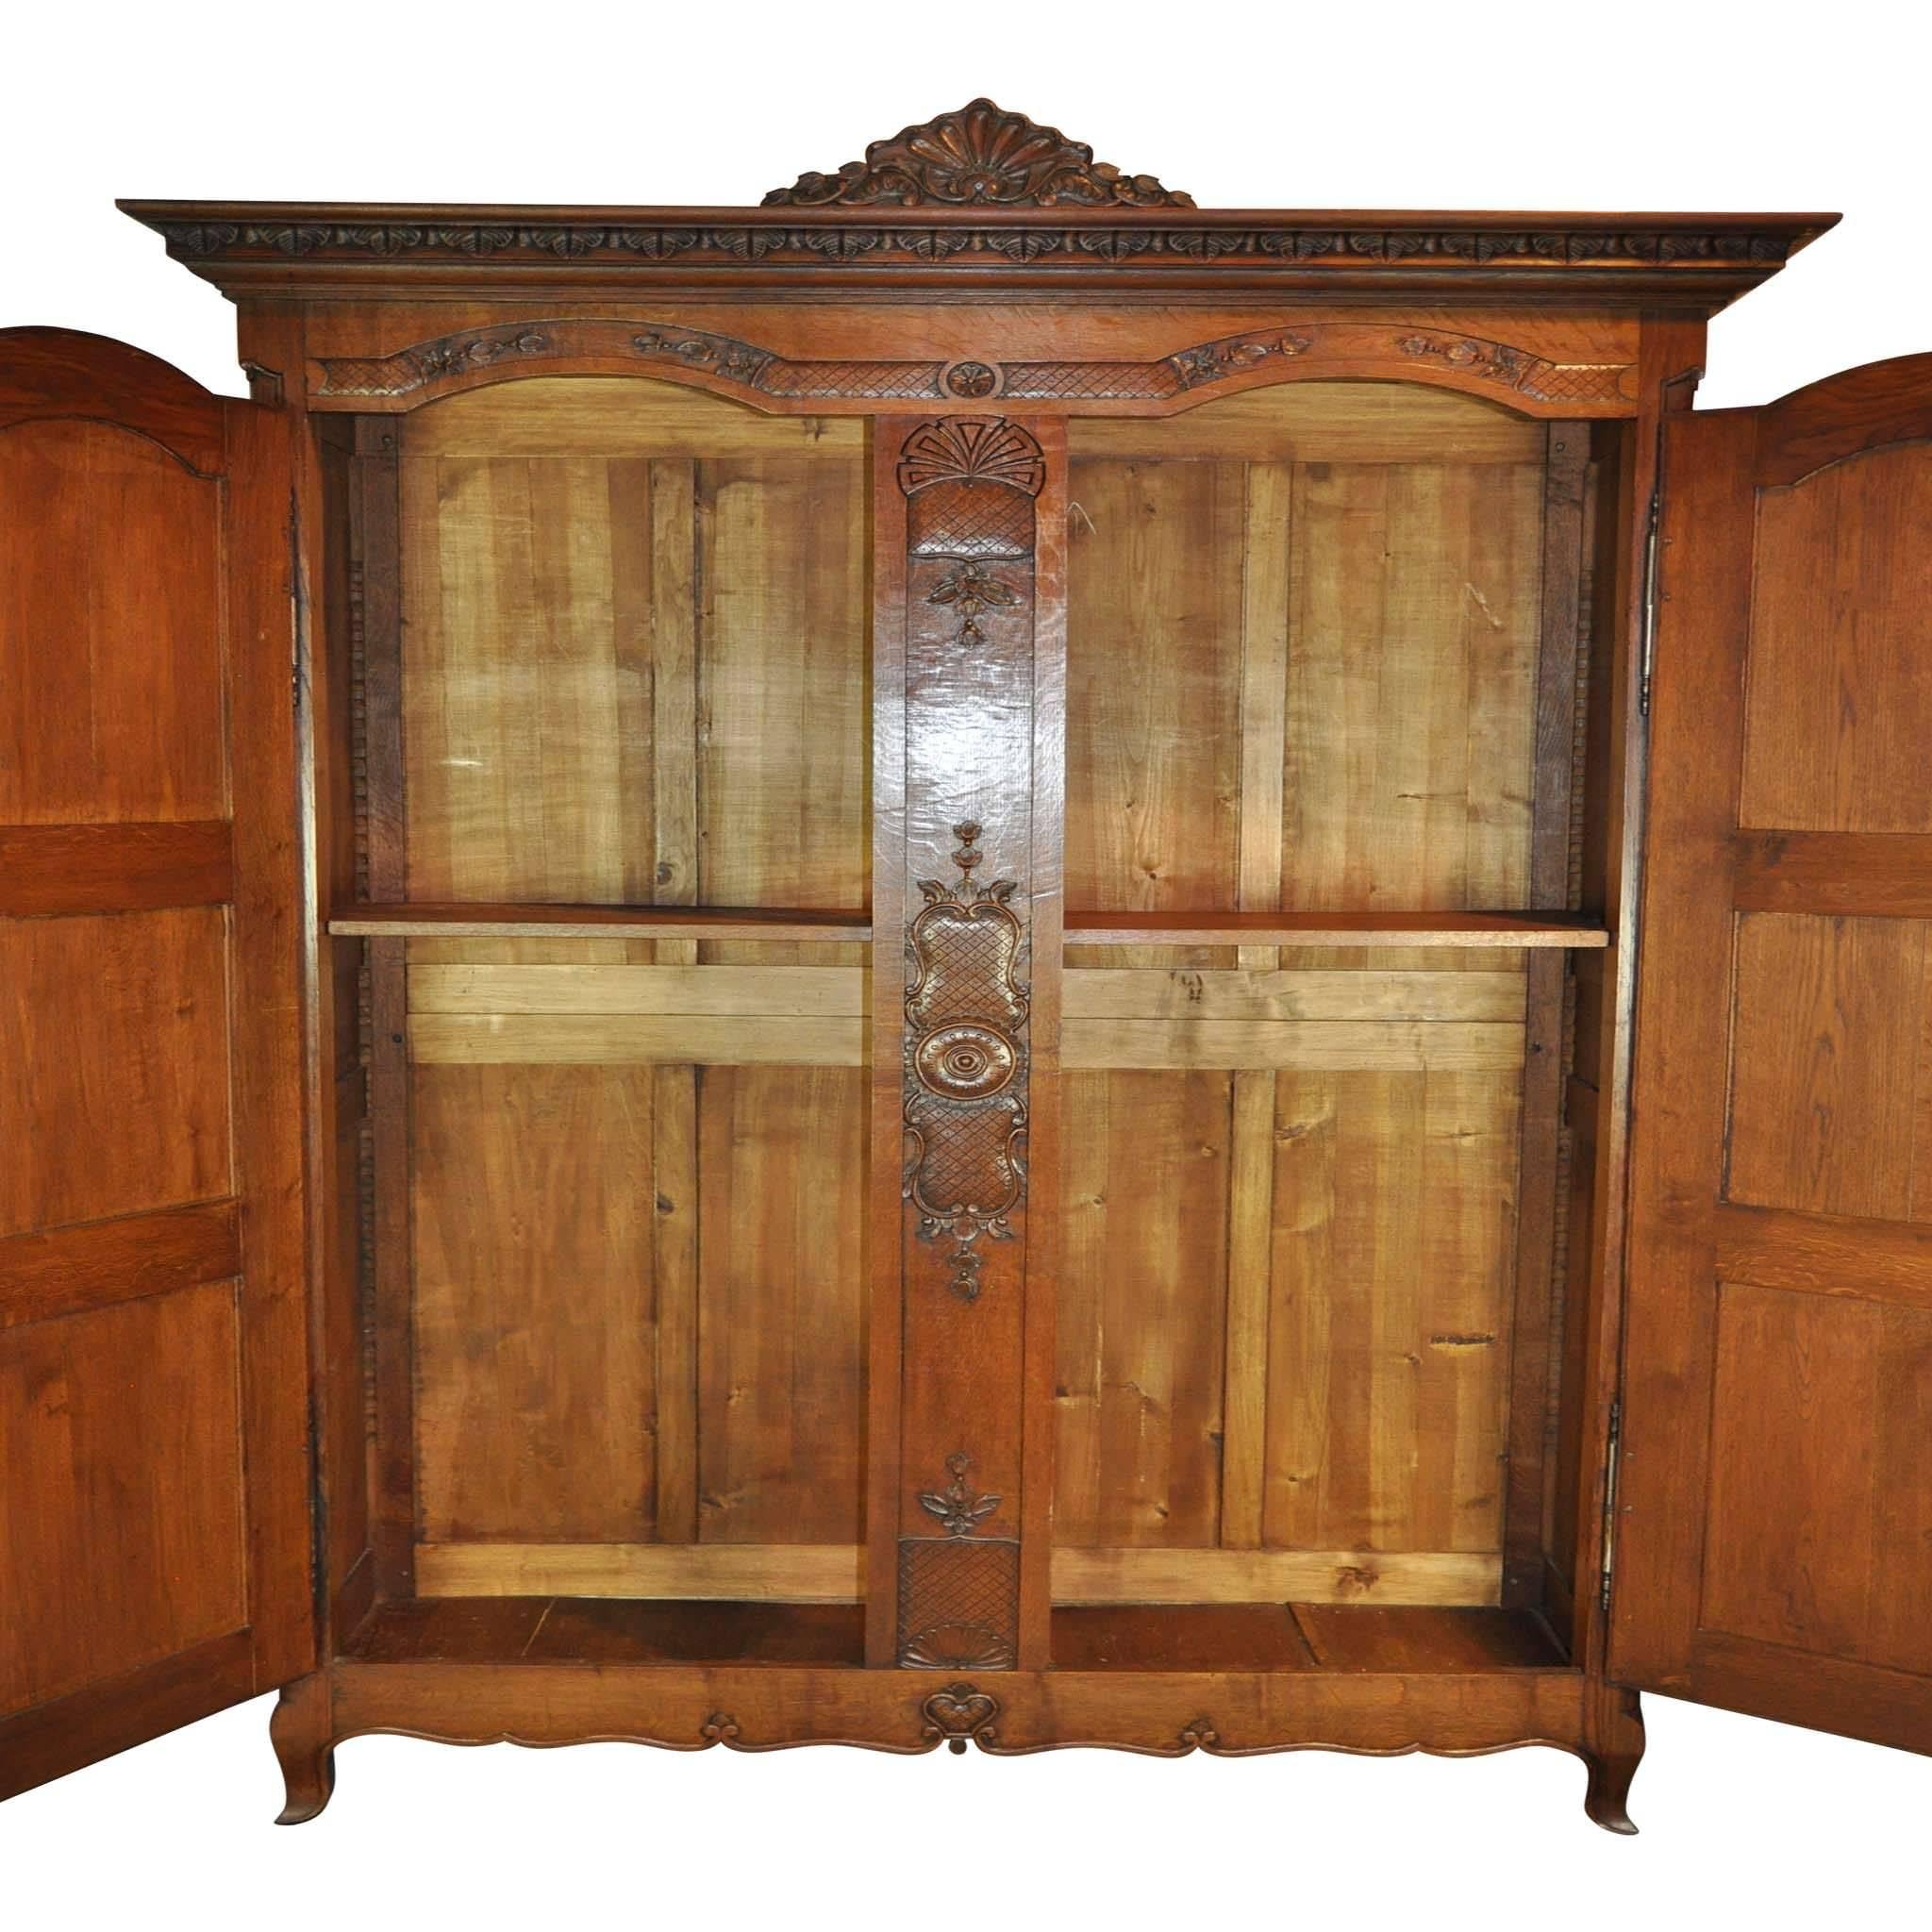 Acanthus leaves, shells and flowers decorate the panels and crown of this large armoire. A center panel separates the two doors, which each have a key. The interior has one adjustable shelf. Made from beautifully flecked quarter sawn white oak.